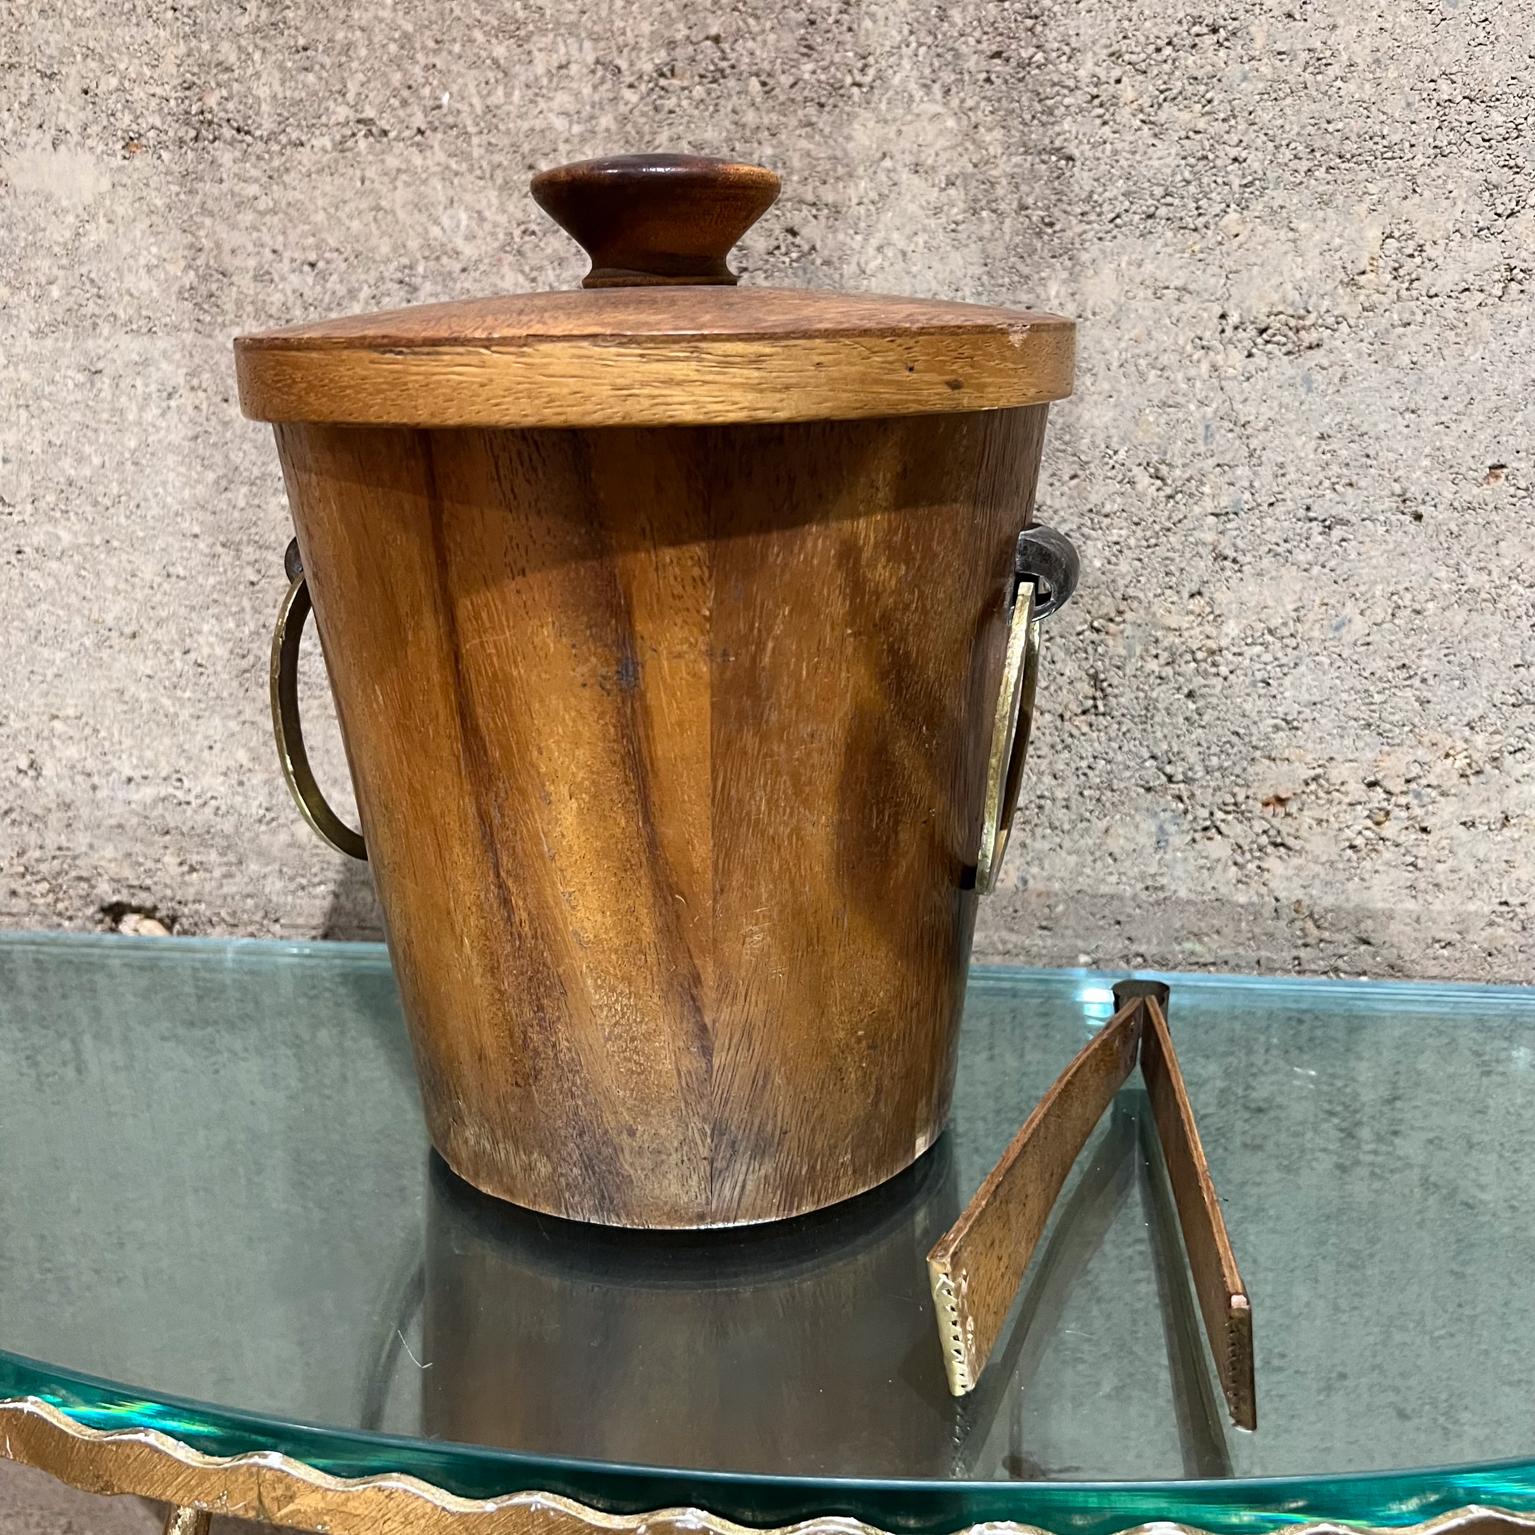 1960s Vintage Teak Wood Brass Ice Bucket Modernist Design Mexico
9.5 h x 7.5 diameter
tongs 6.63 long x 1.13 d x 2.25 w
Preowned original vintage condition, wear is present.
Aluminum liner shows wear.
Refer to all images for details.